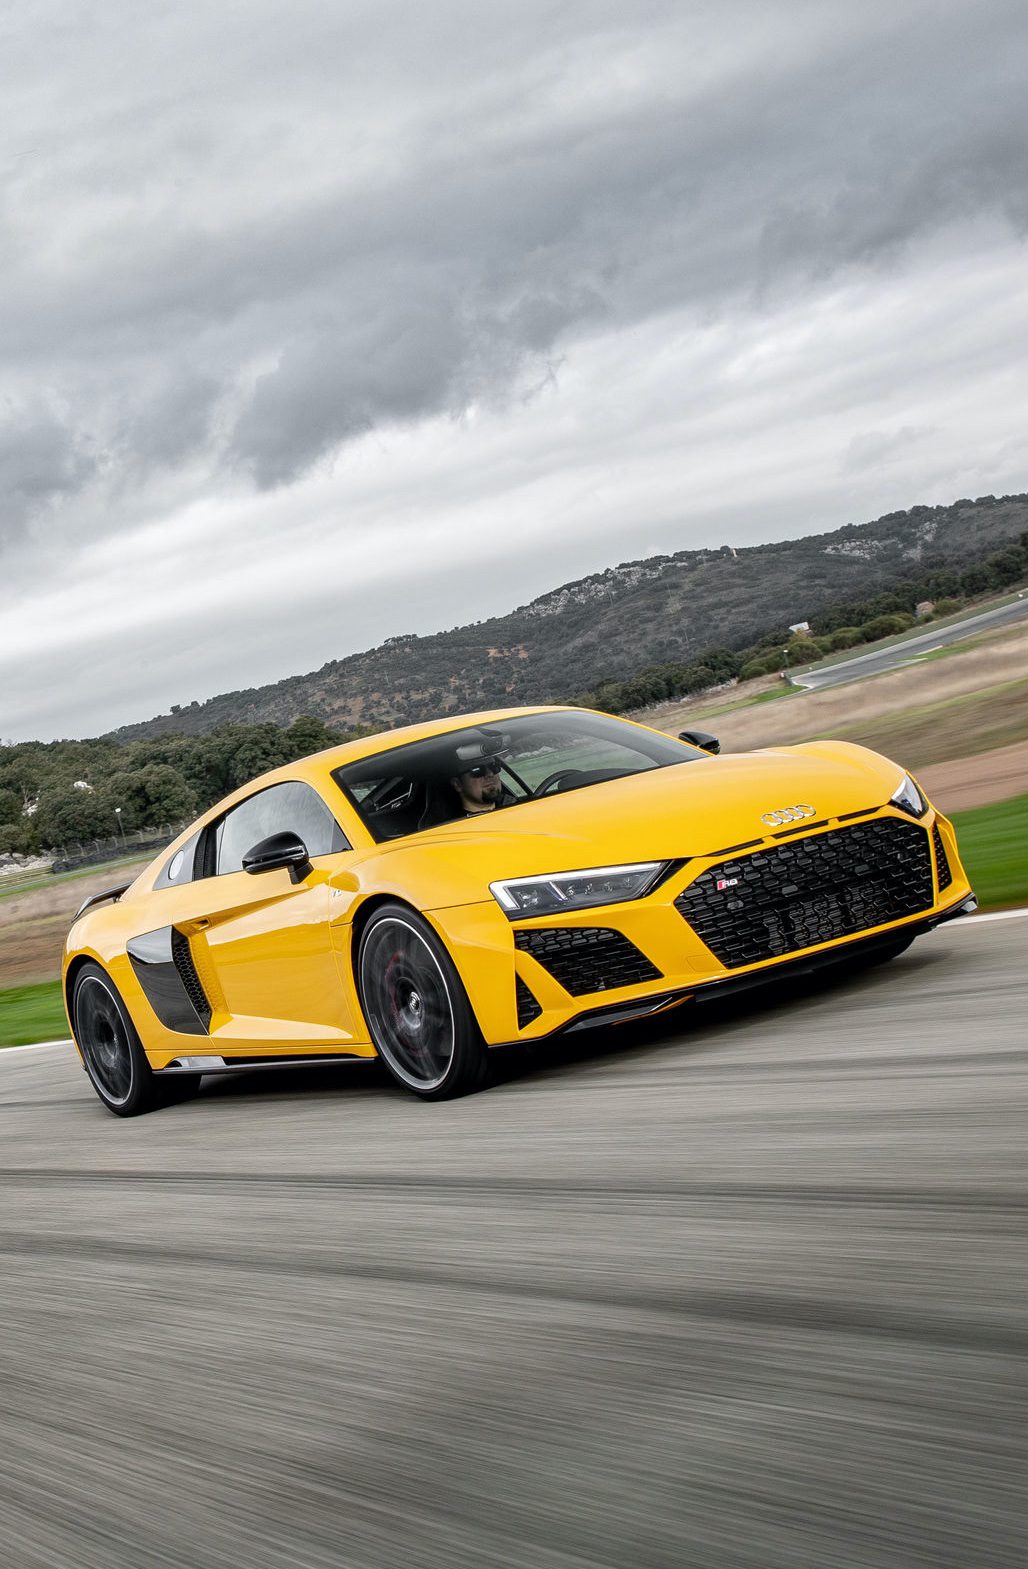 Audi's special send-off for the R8 is a social-media video - Drive